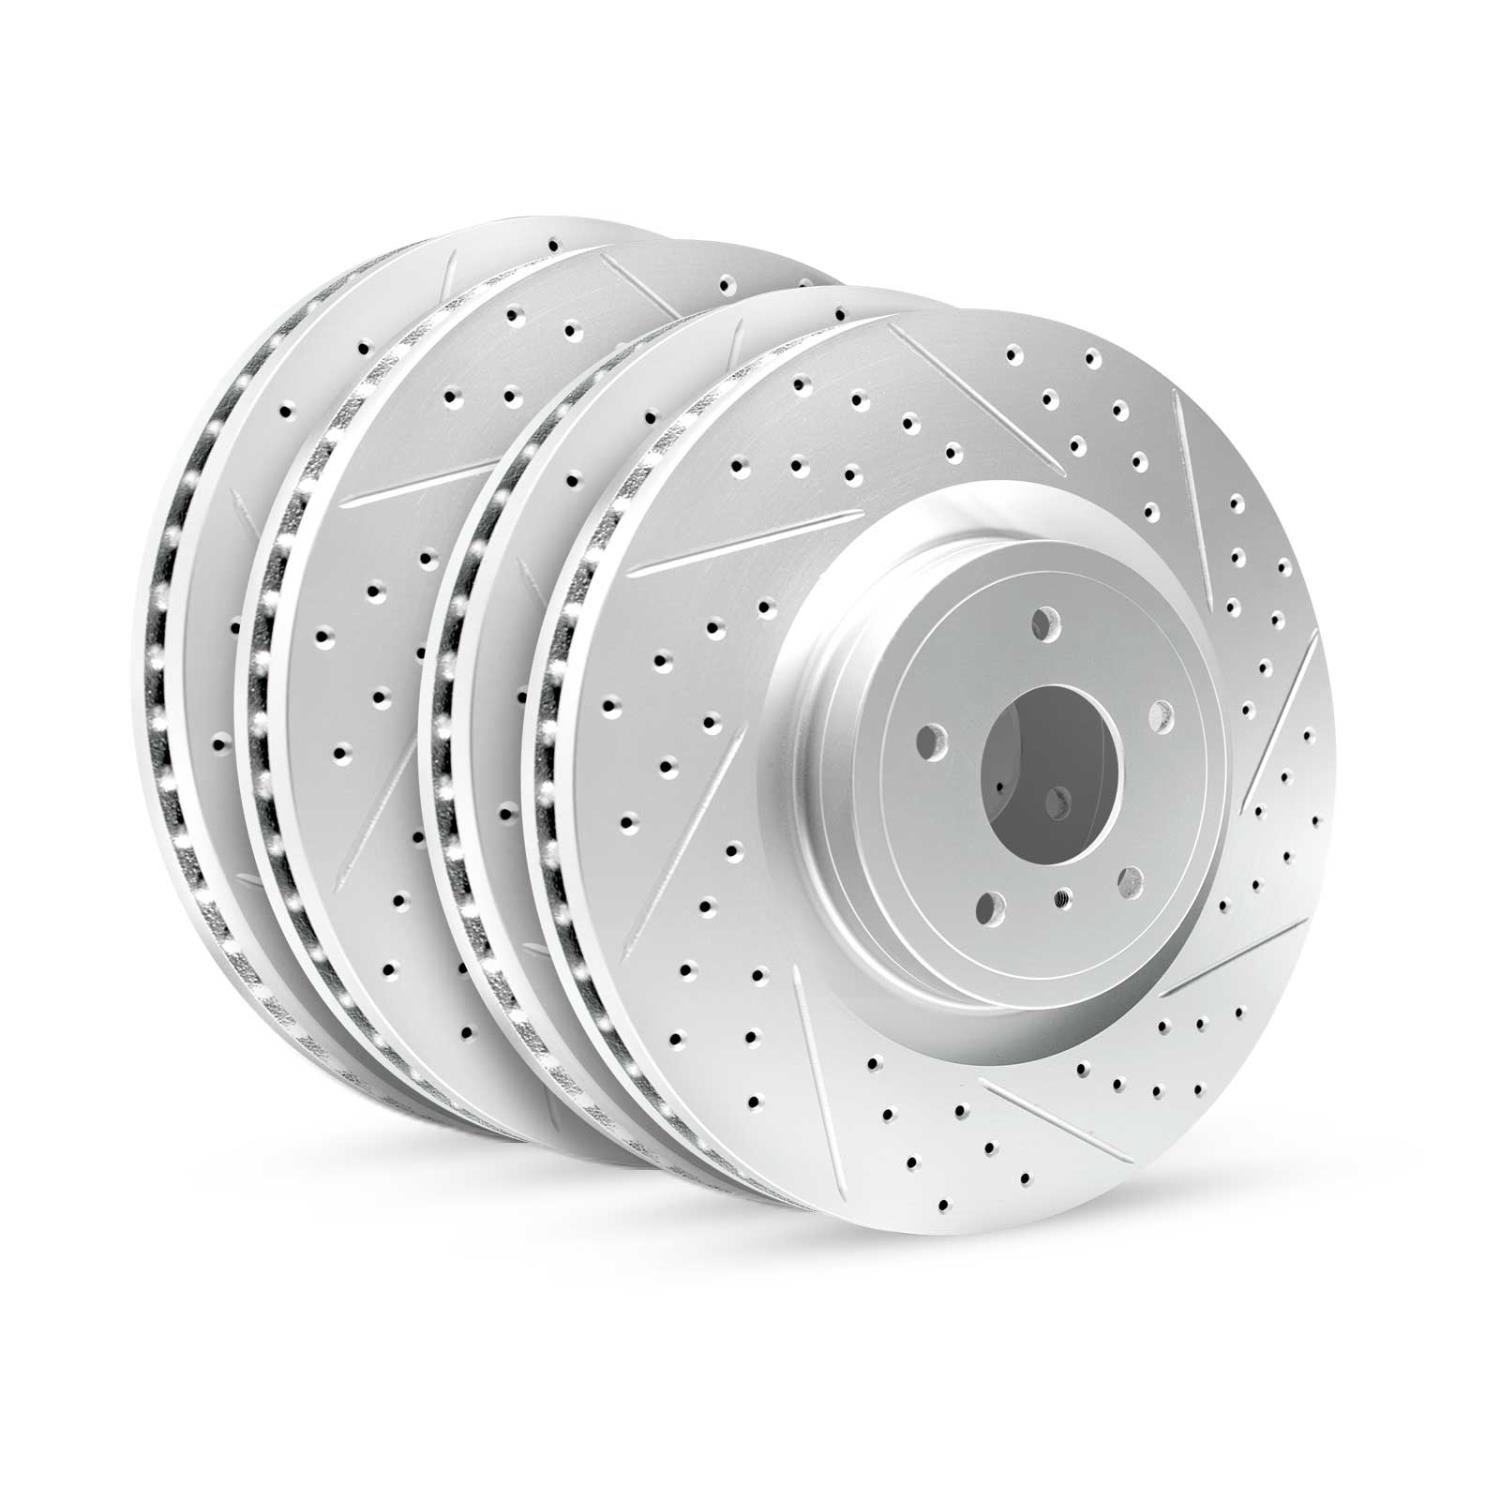 GEO-Carbon Drilled/Slotted Rotors, 2002-2006 Infiniti/Nissan, Position: Front/Rear